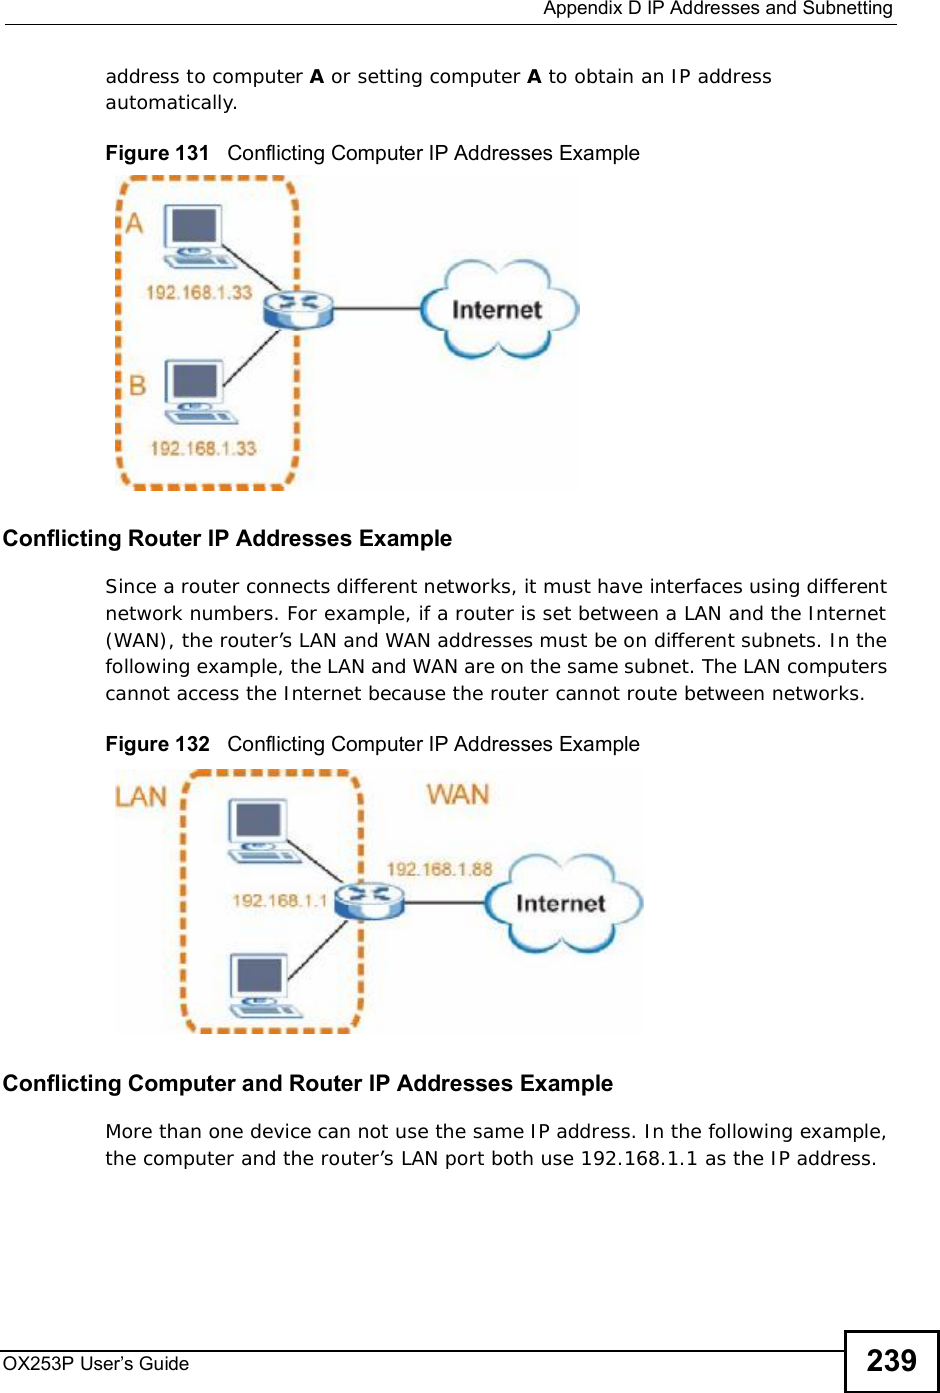  Appendix DIP Addresses and SubnettingOX253P User’s Guide 239address to computer A or setting computer A to obtain an IP address automatically.  Figure 131   Conflicting Computer IP Addresses ExampleConflicting Router IP Addresses ExampleSince a router connects different networks, it must have interfaces using different network numbers. For example, if a router is set between a LAN and the Internet (WAN), the router’s LAN and WAN addresses must be on different subnets. In the following example, the LAN and WAN are on the same subnet. The LAN computers cannot access the Internet because the router cannot route between networks.Figure 132   Conflicting Computer IP Addresses ExampleConflicting Computer and Router IP Addresses ExampleMore than one device can not use the same IP address. In the following example, the computer and the router’s LAN port both use 192.168.1.1 as the IP address. 